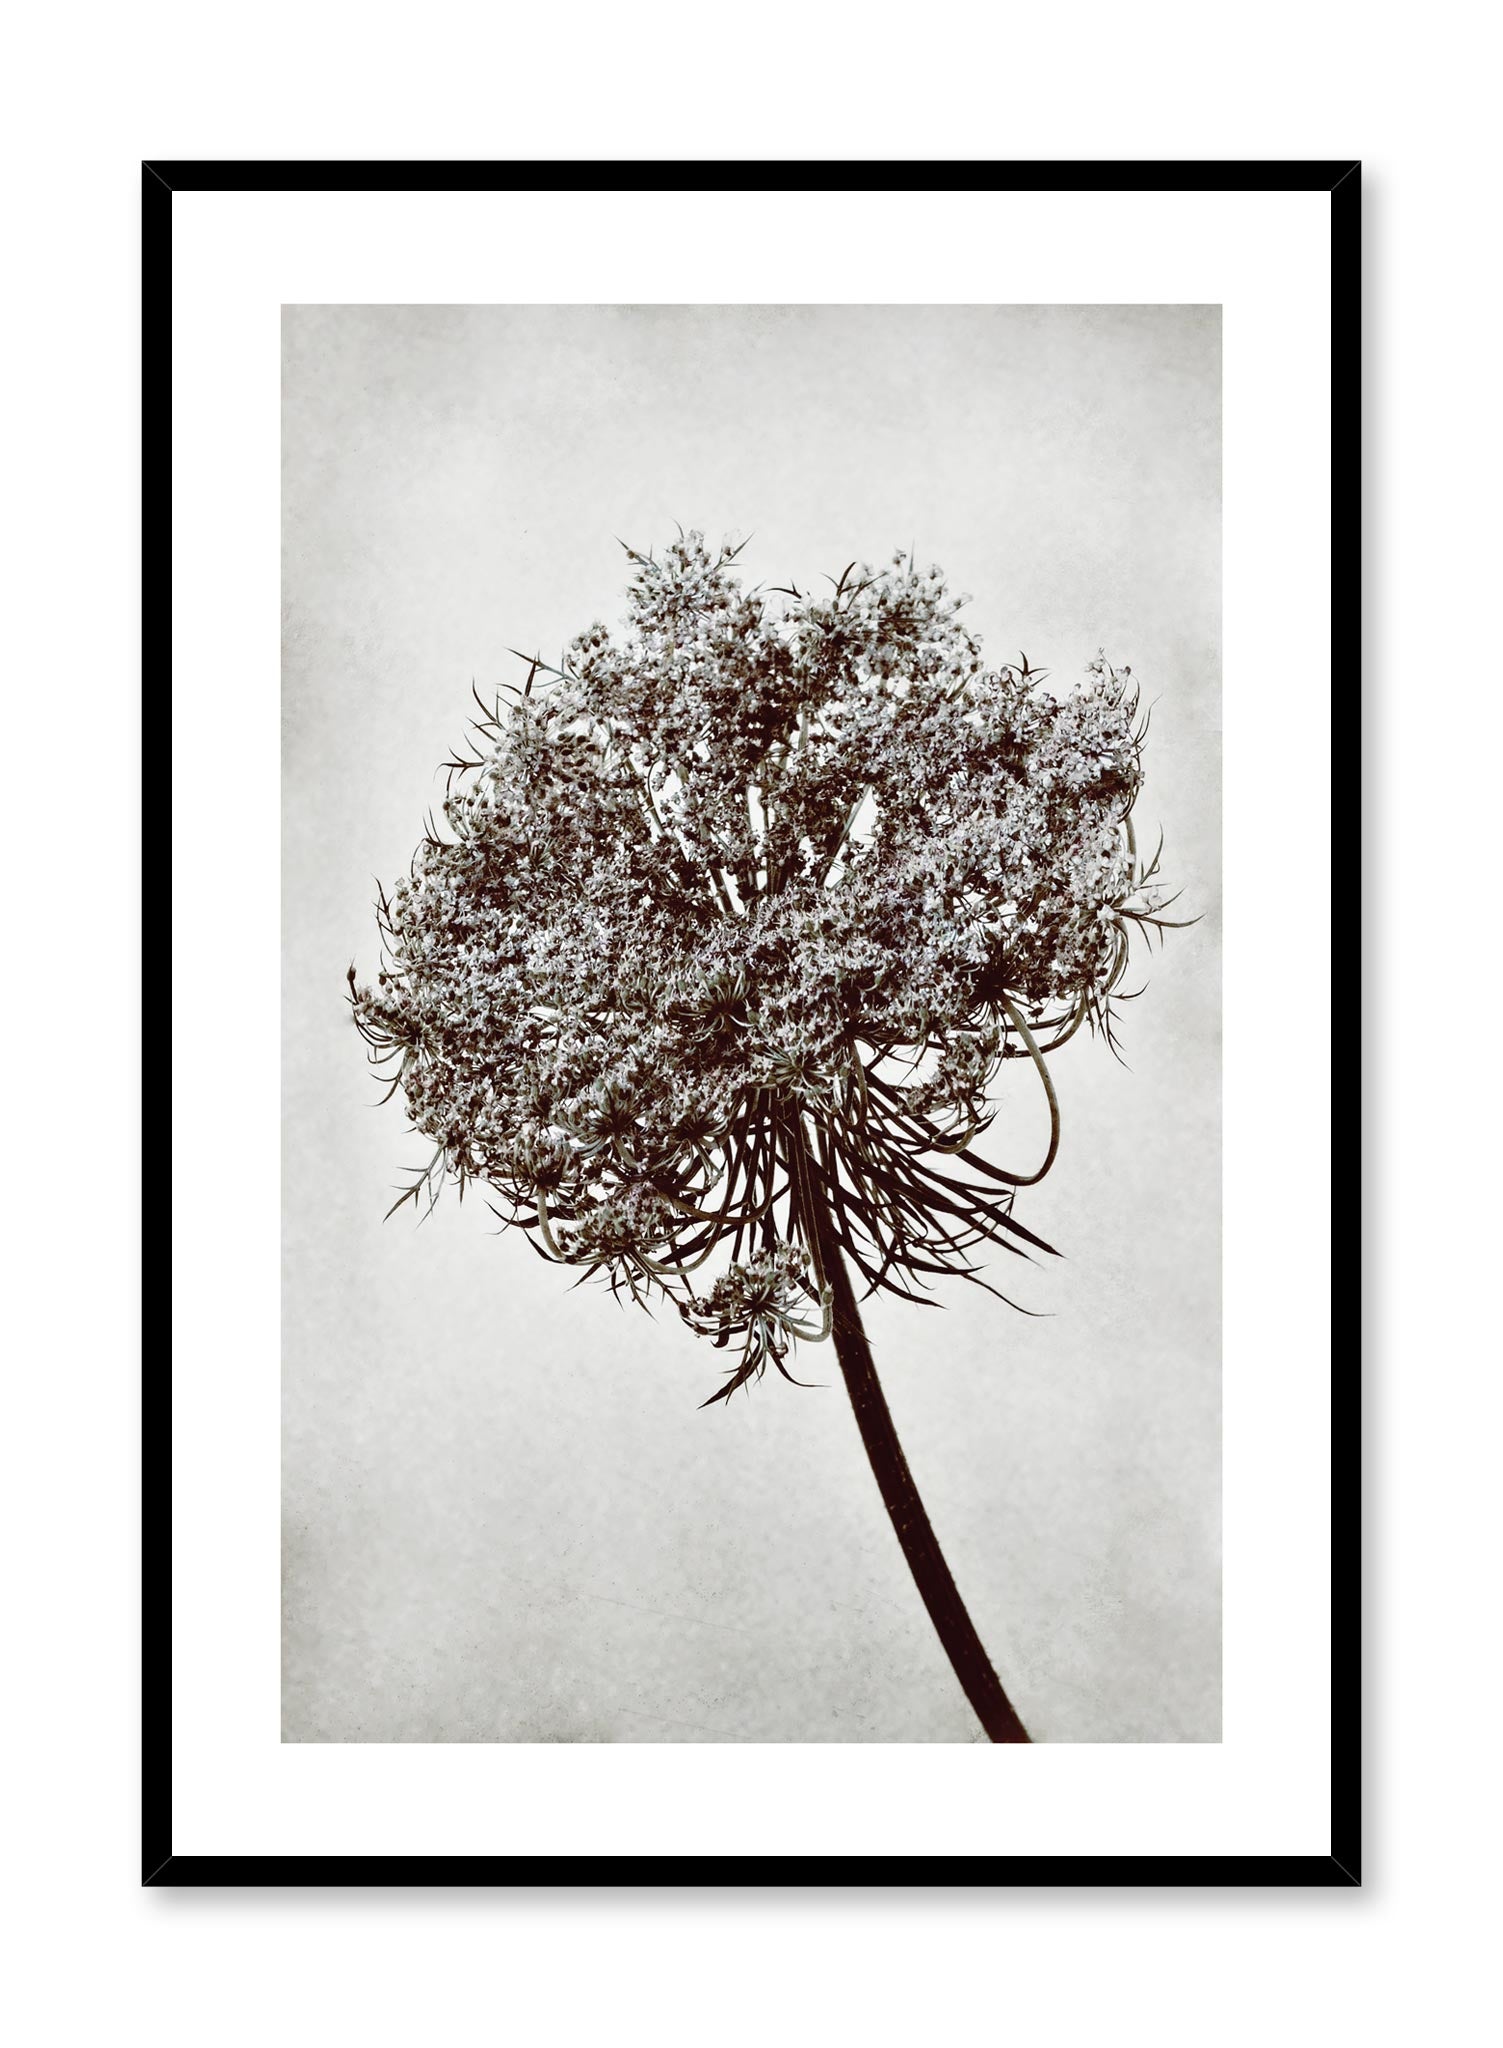 Minimalist design photography poster of black and white Towering Tree by Love Warriors Creative Studio - Buy at Opposite Wall